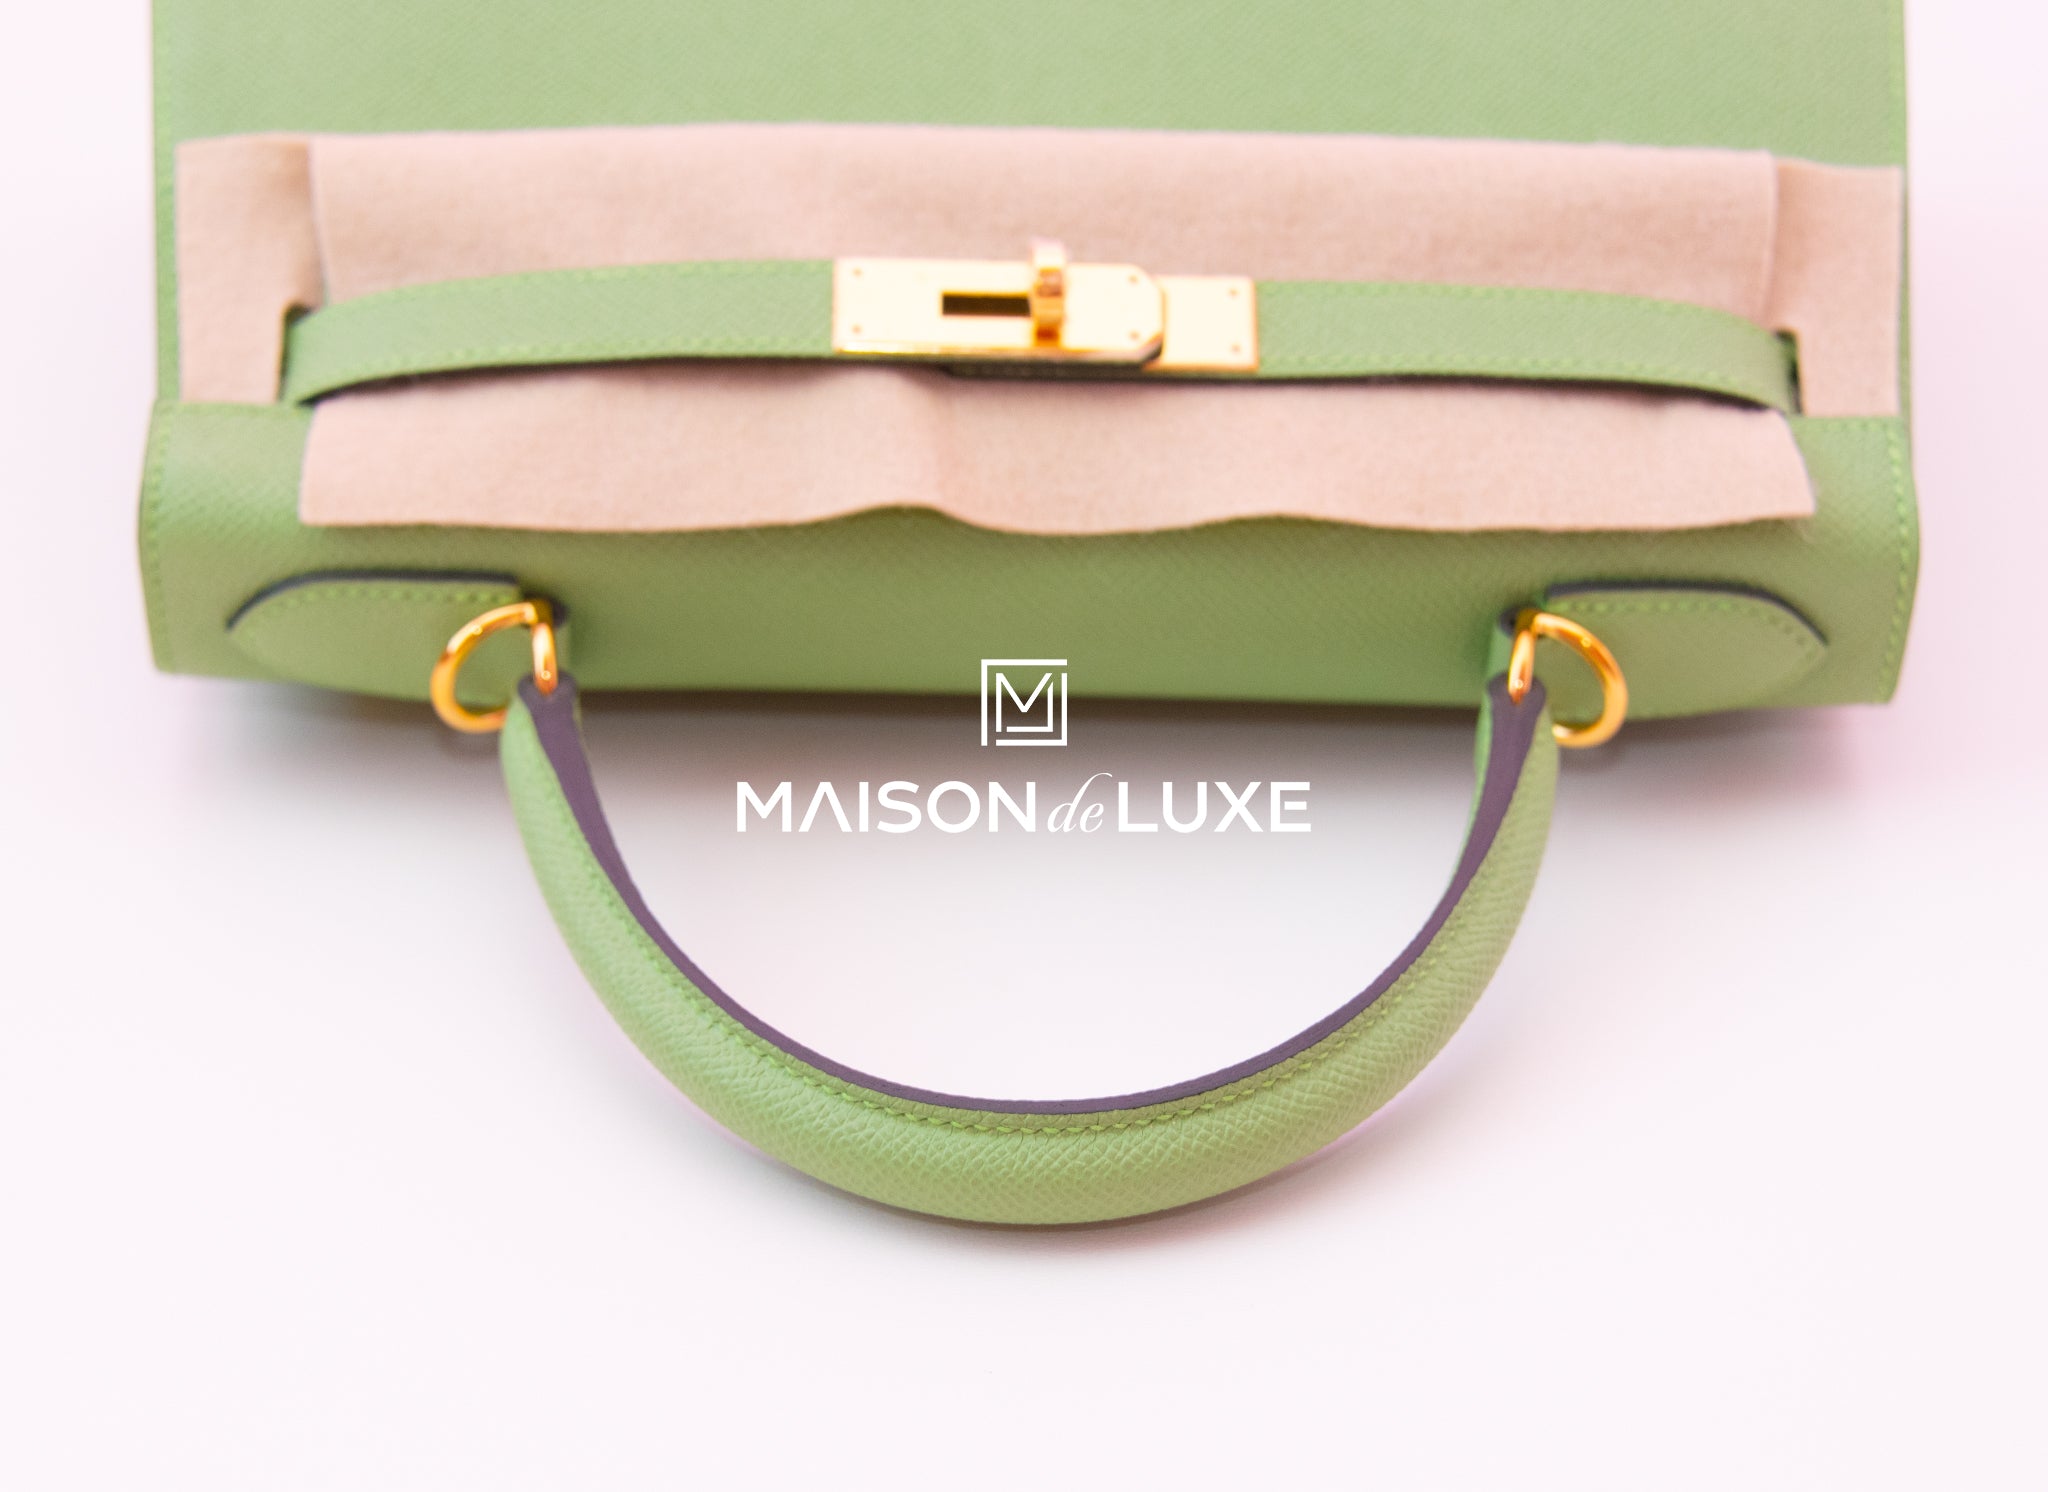 Hermes Special Order (HSS) Kelly Sellier 25 Vert Criquet Epsom Permabr –  Madison Avenue Couture